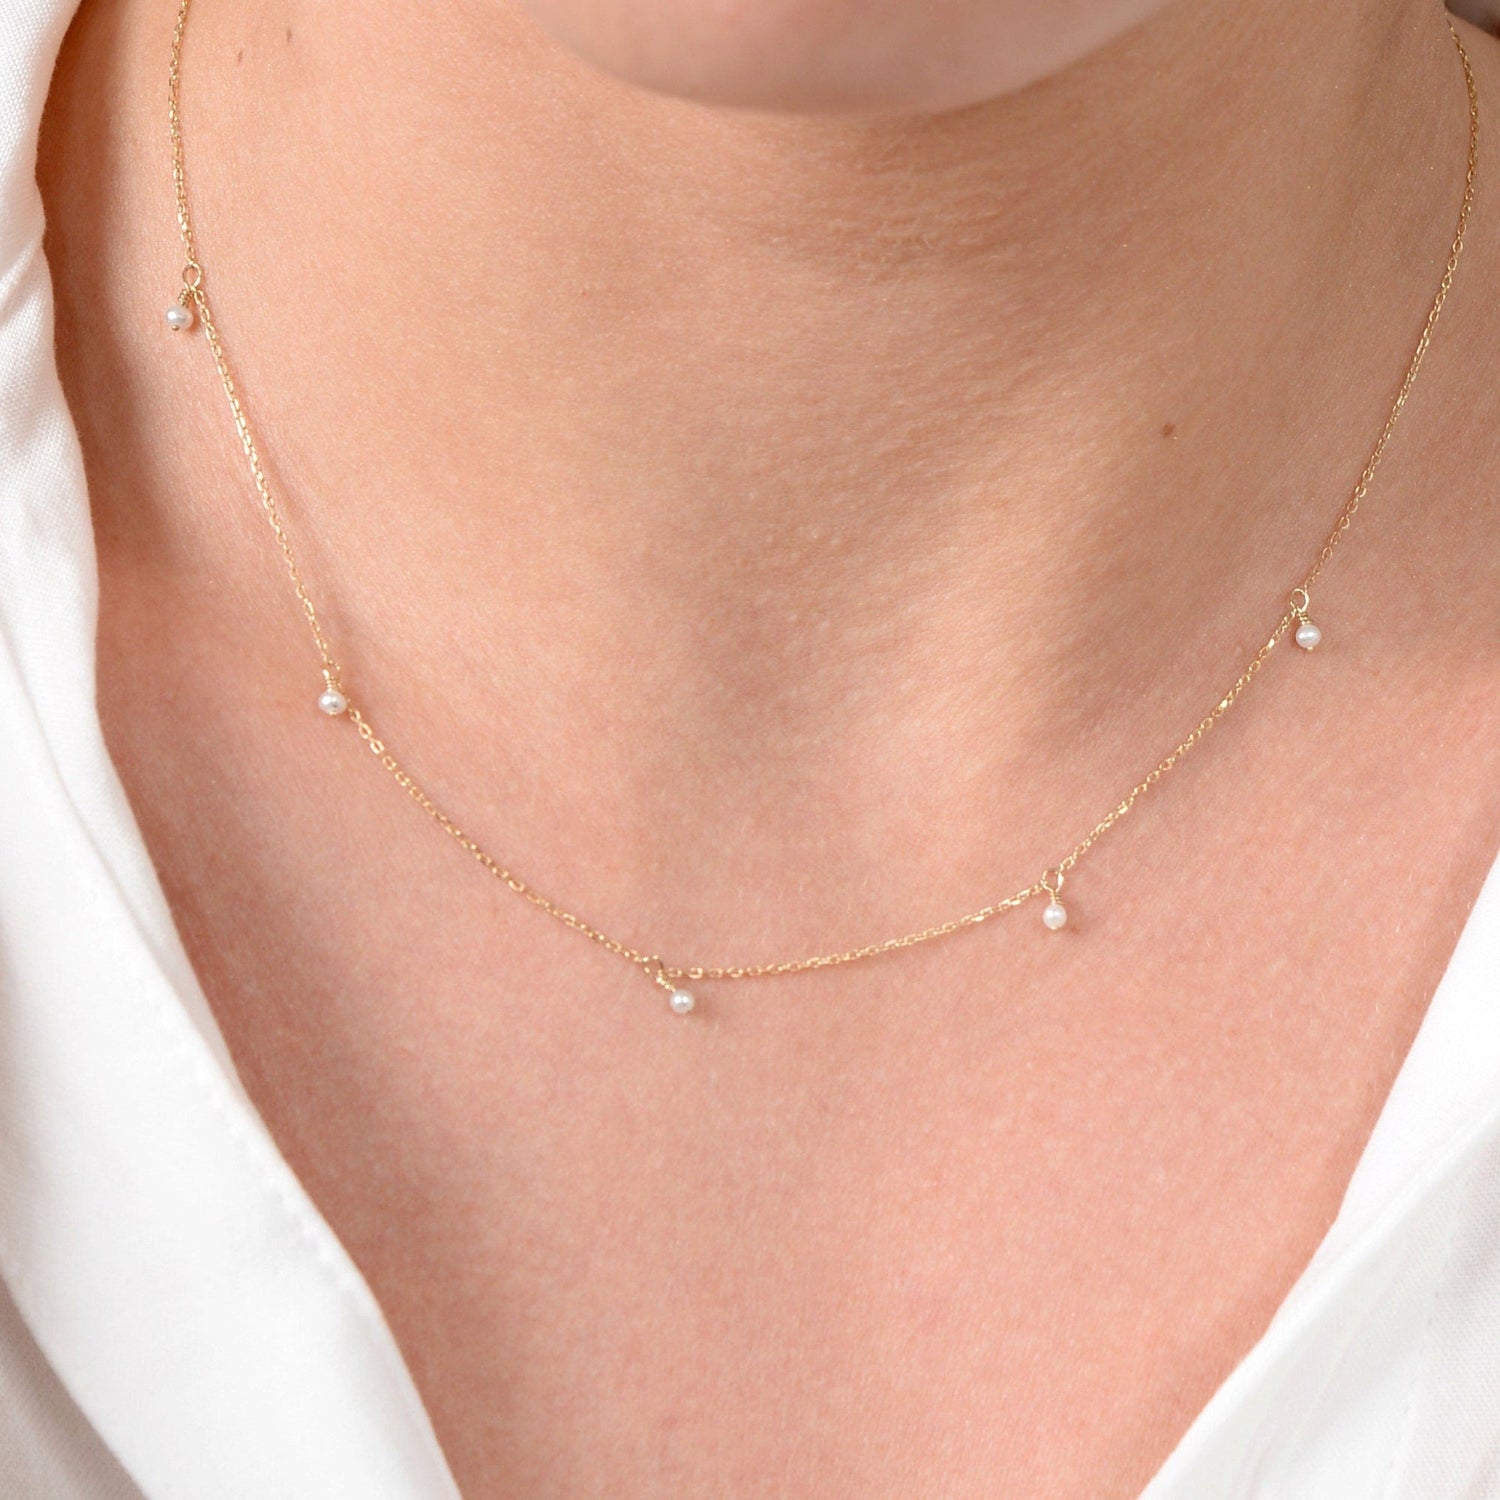 Tiny Hanging Pearls Necklace / Dainty Pearl Solid Gold Necklace / Minimalist 14k Solid Gold Necklace / Unique Christmas Sale for her